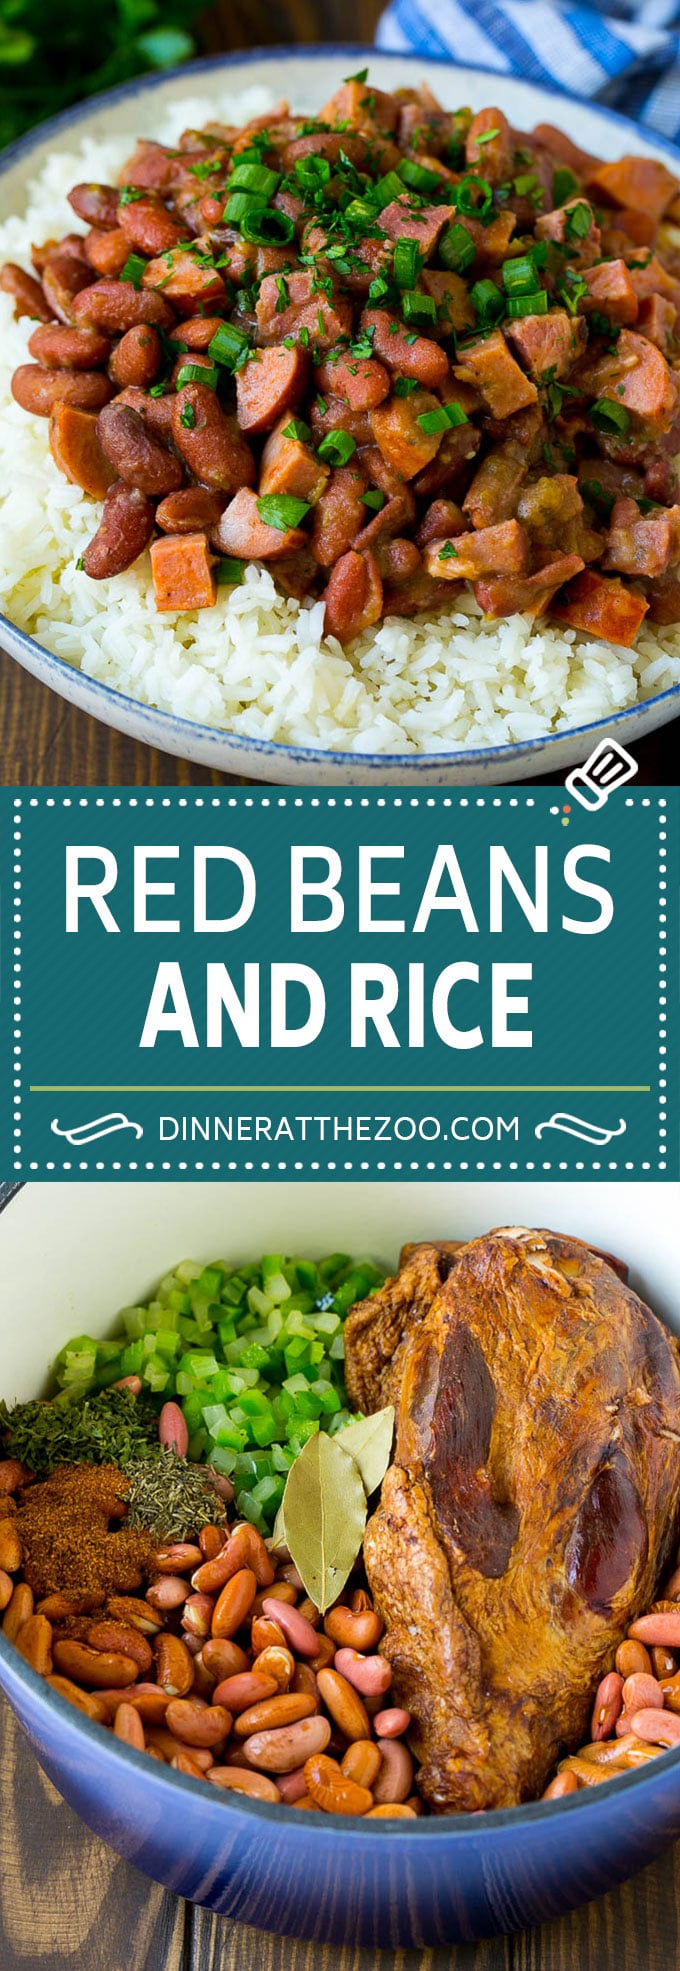 Red Beans and Rice Recipe | Red Beans and Sausage | Cajun Red Beans #beans #rice #sausage #ham #cajun #dinner #dinneratthezoo